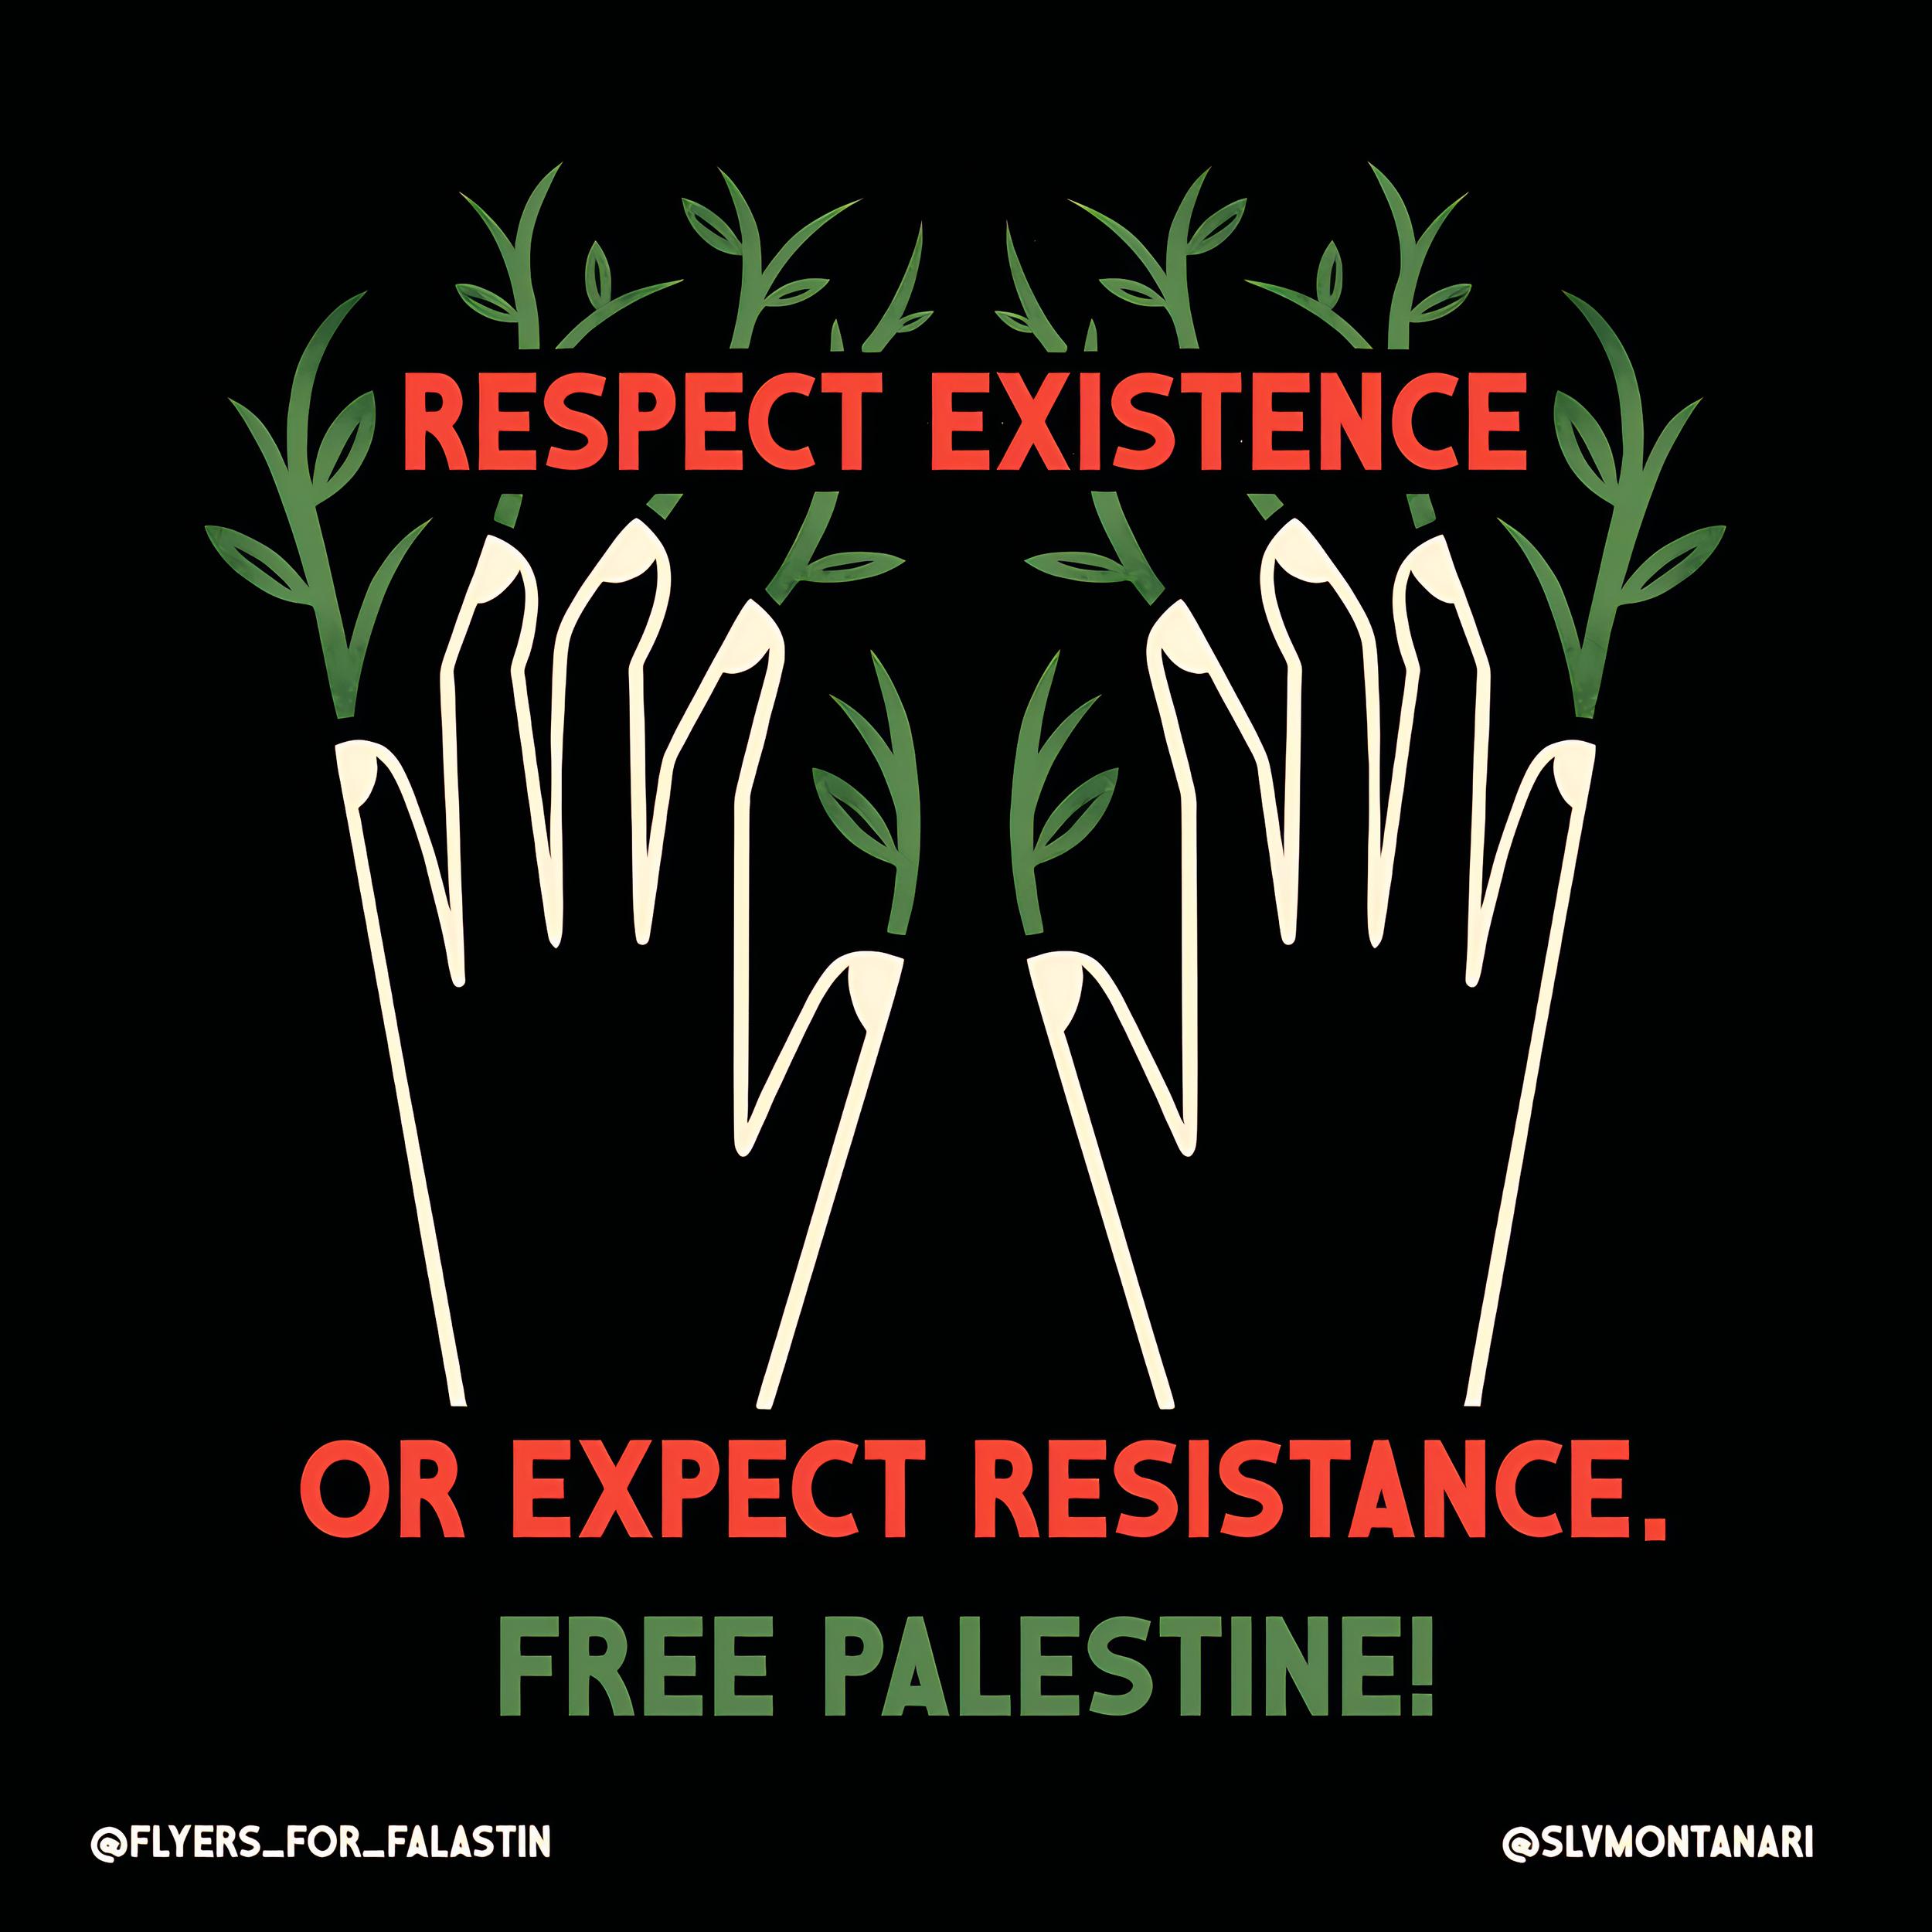 Respect existence or expect resistance, free Palestine!